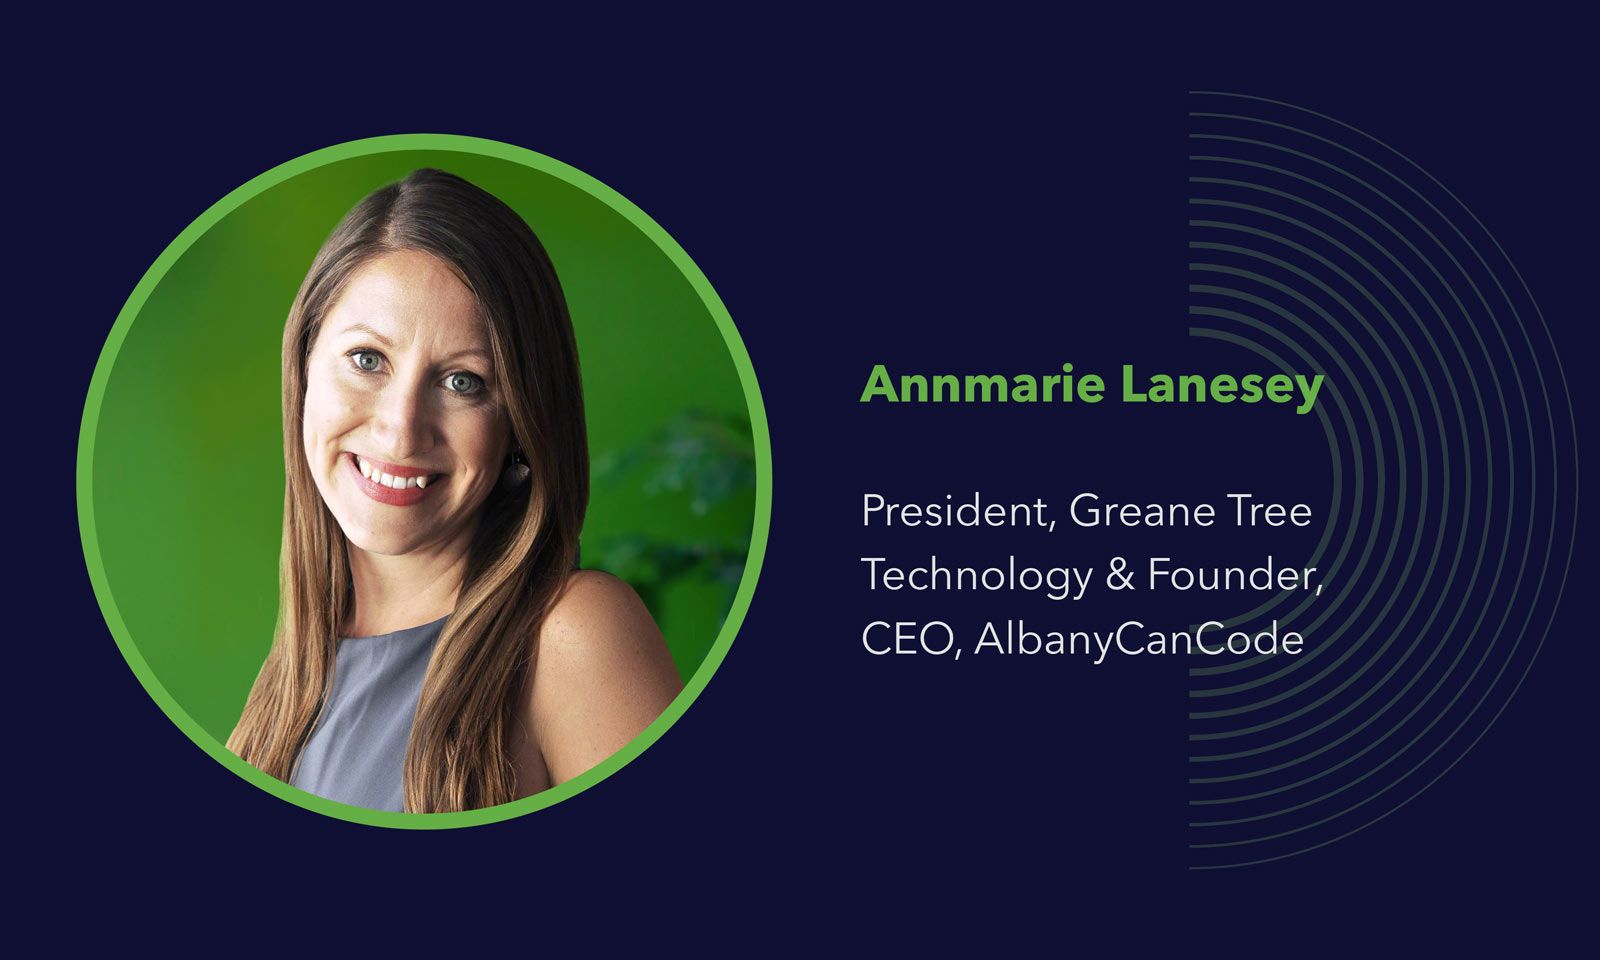 Annmarie Lanesey of Greane Tree Technology